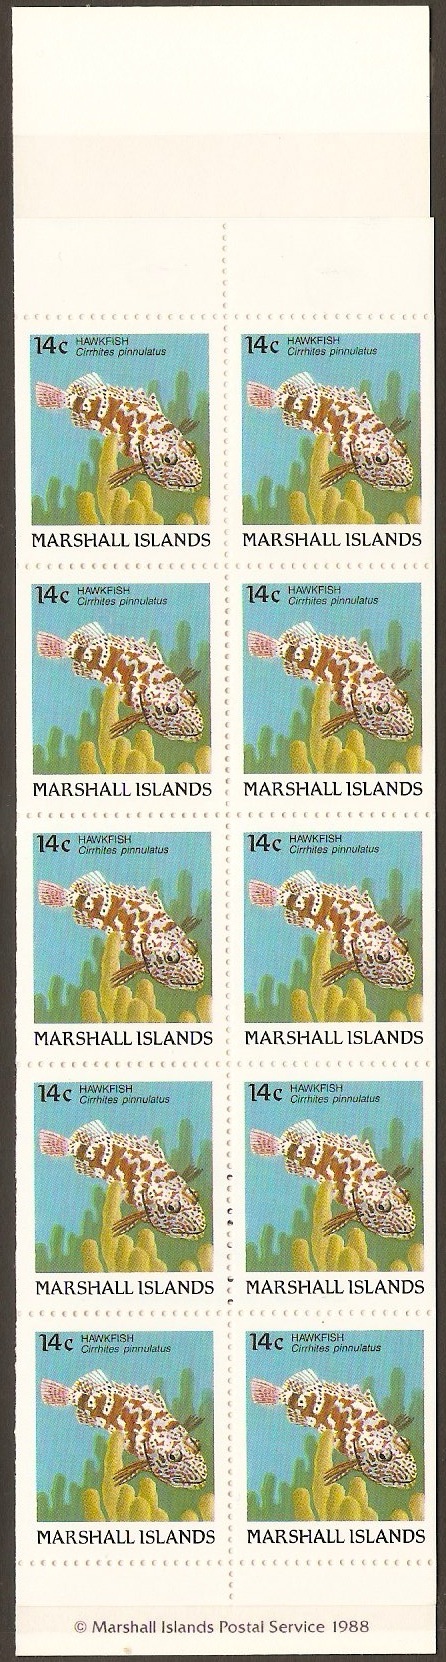 Marshall Islands 1988 Fish Series Stamp Booklet. SG149.